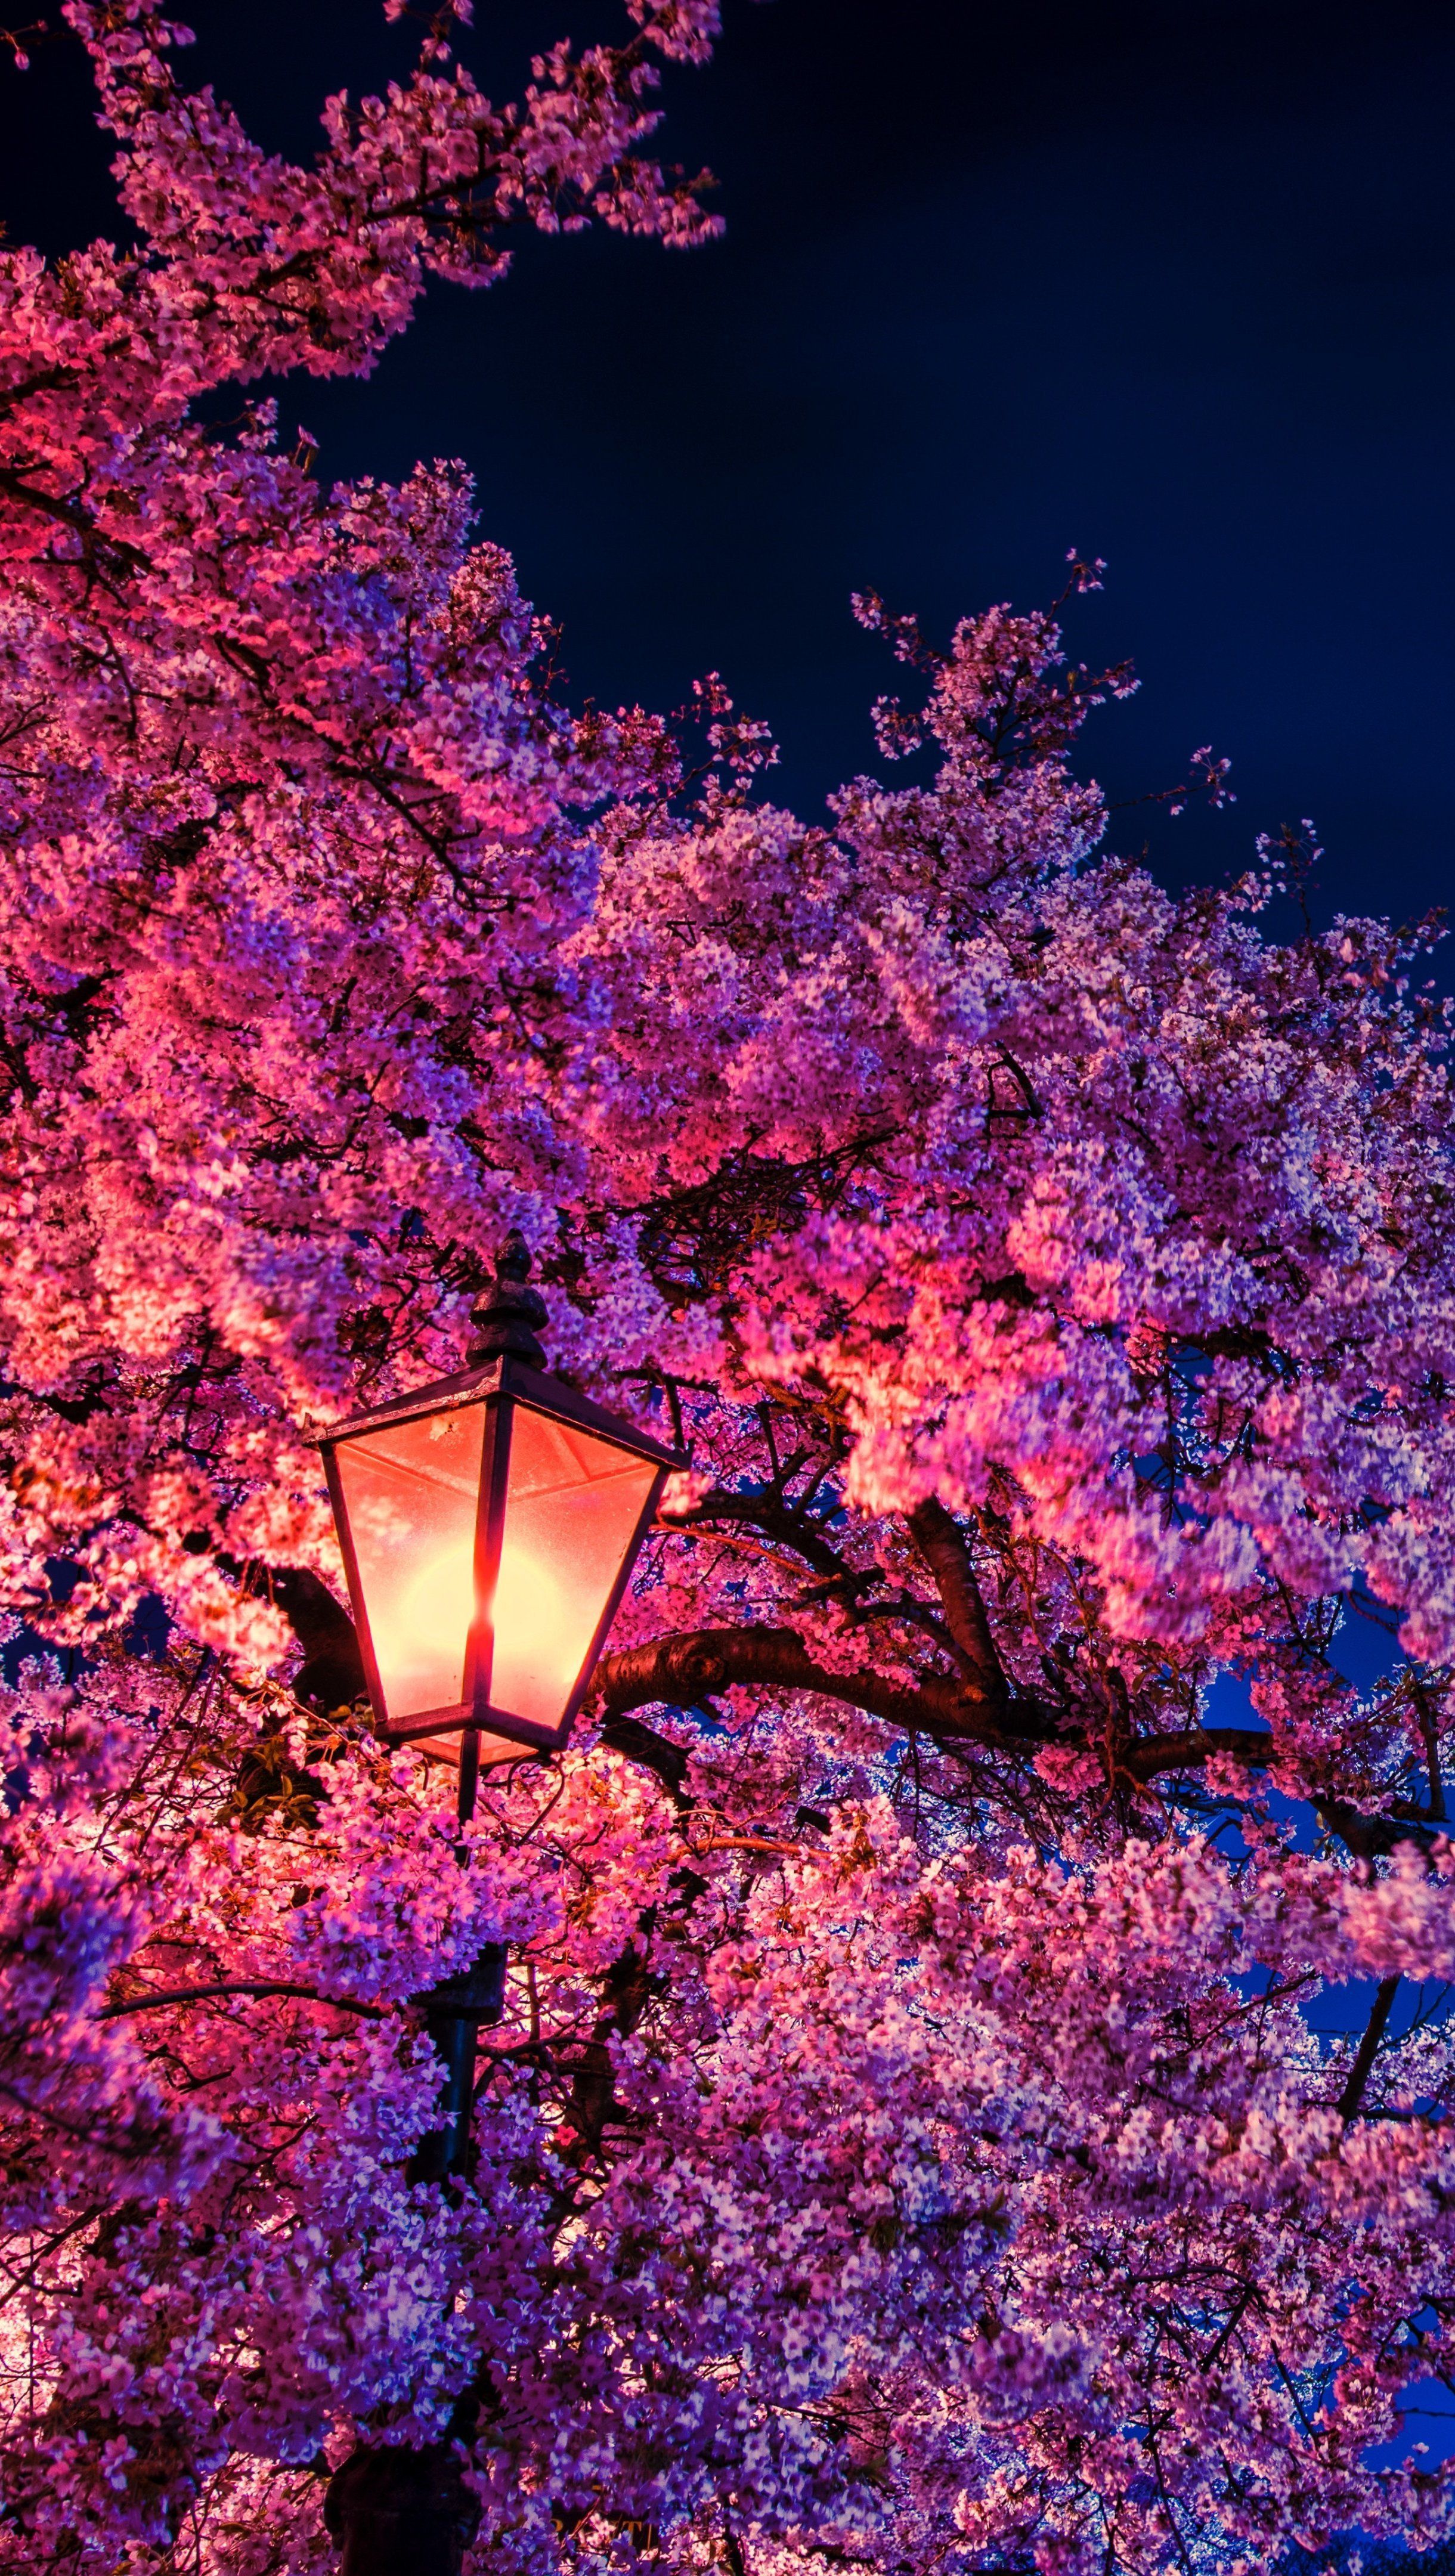 A pink tree with a red light shining through it. - Night, cherry